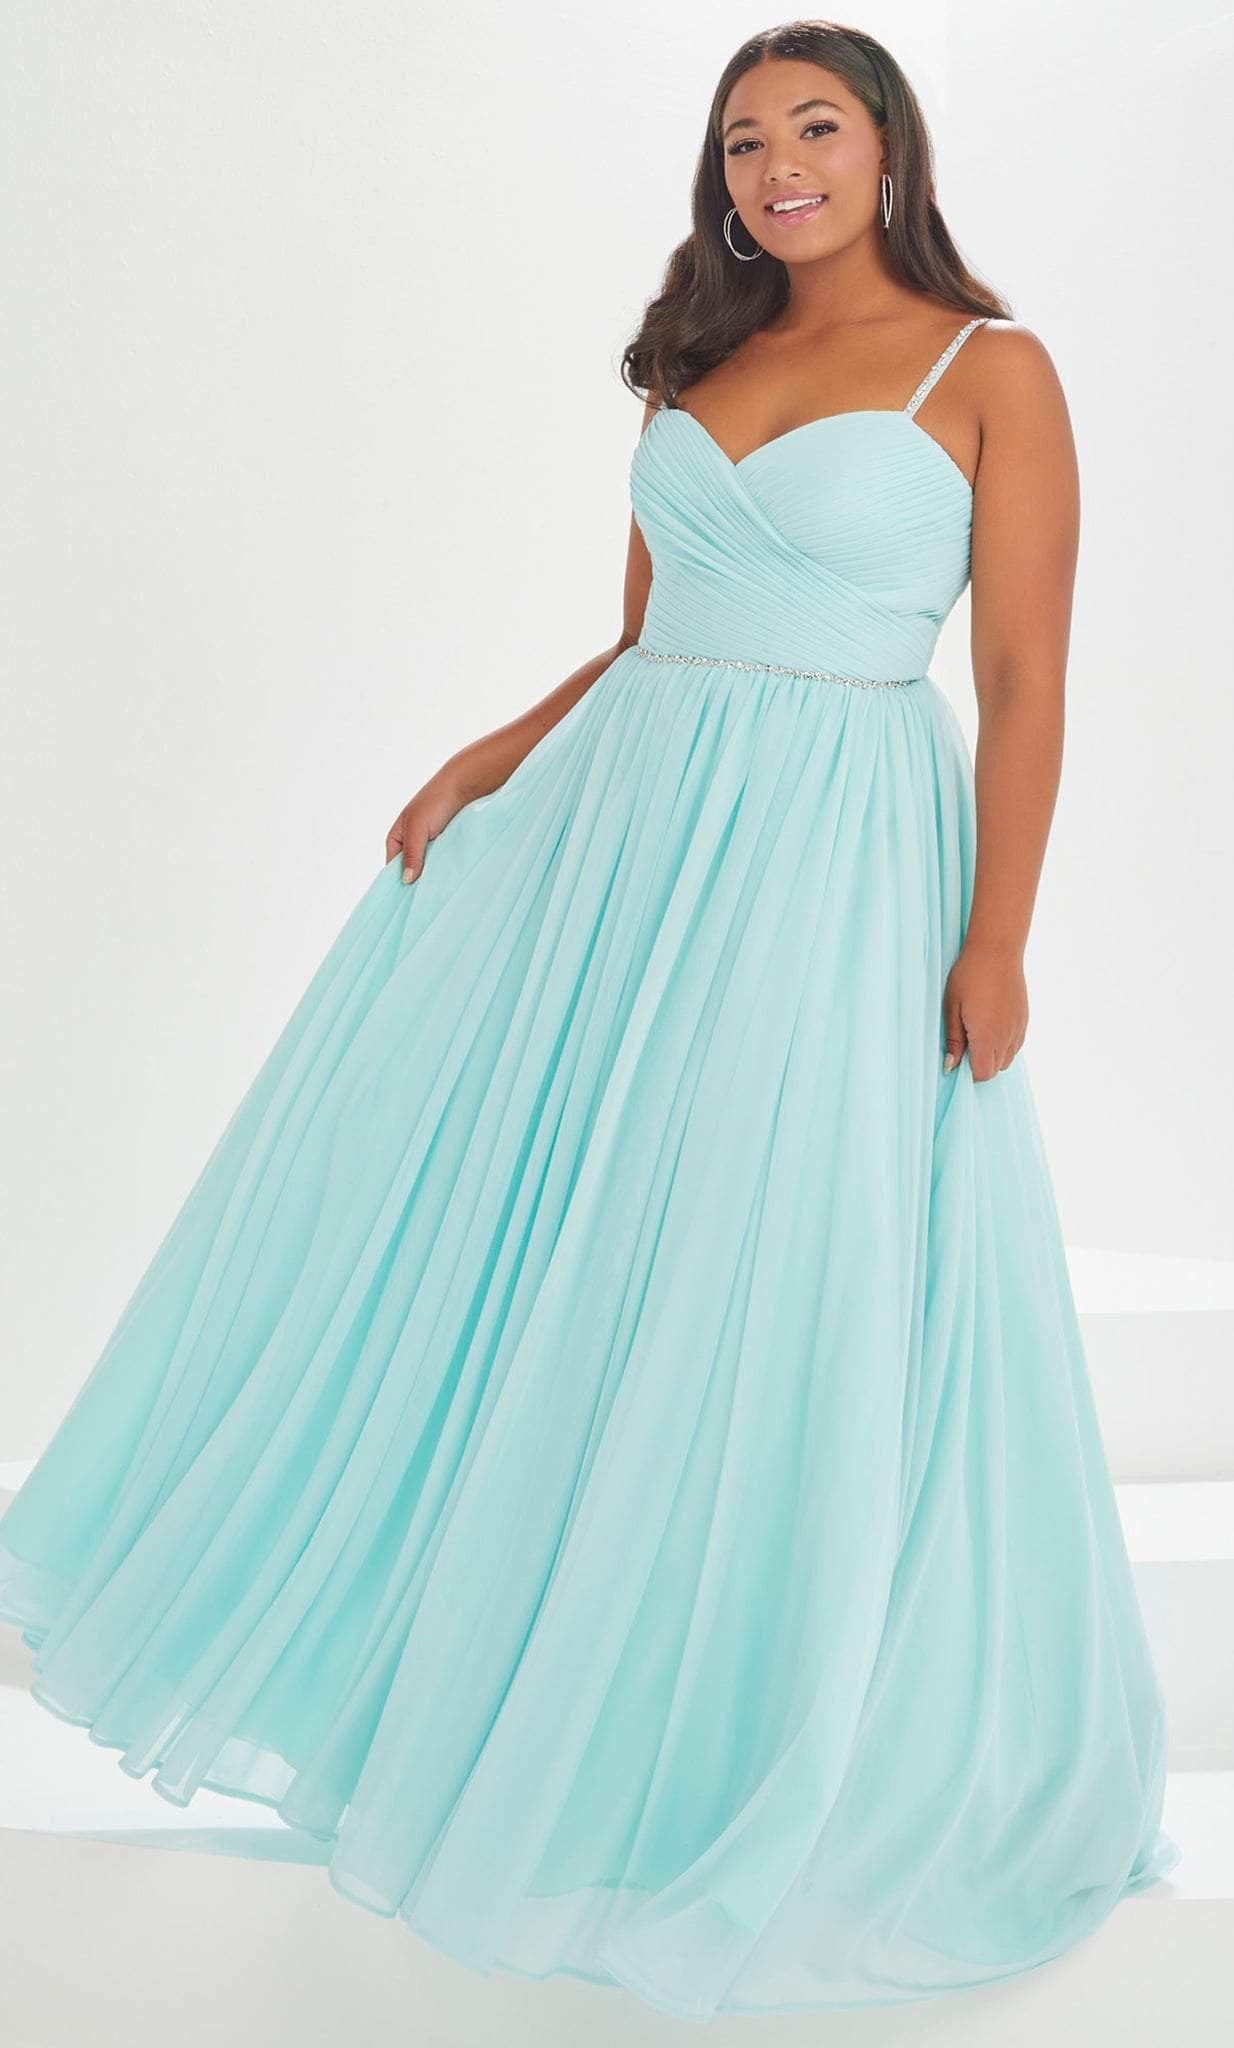 Image of Tiffany Designs by Christina Wu 16036 - Pleated Chiffon Prom Gown